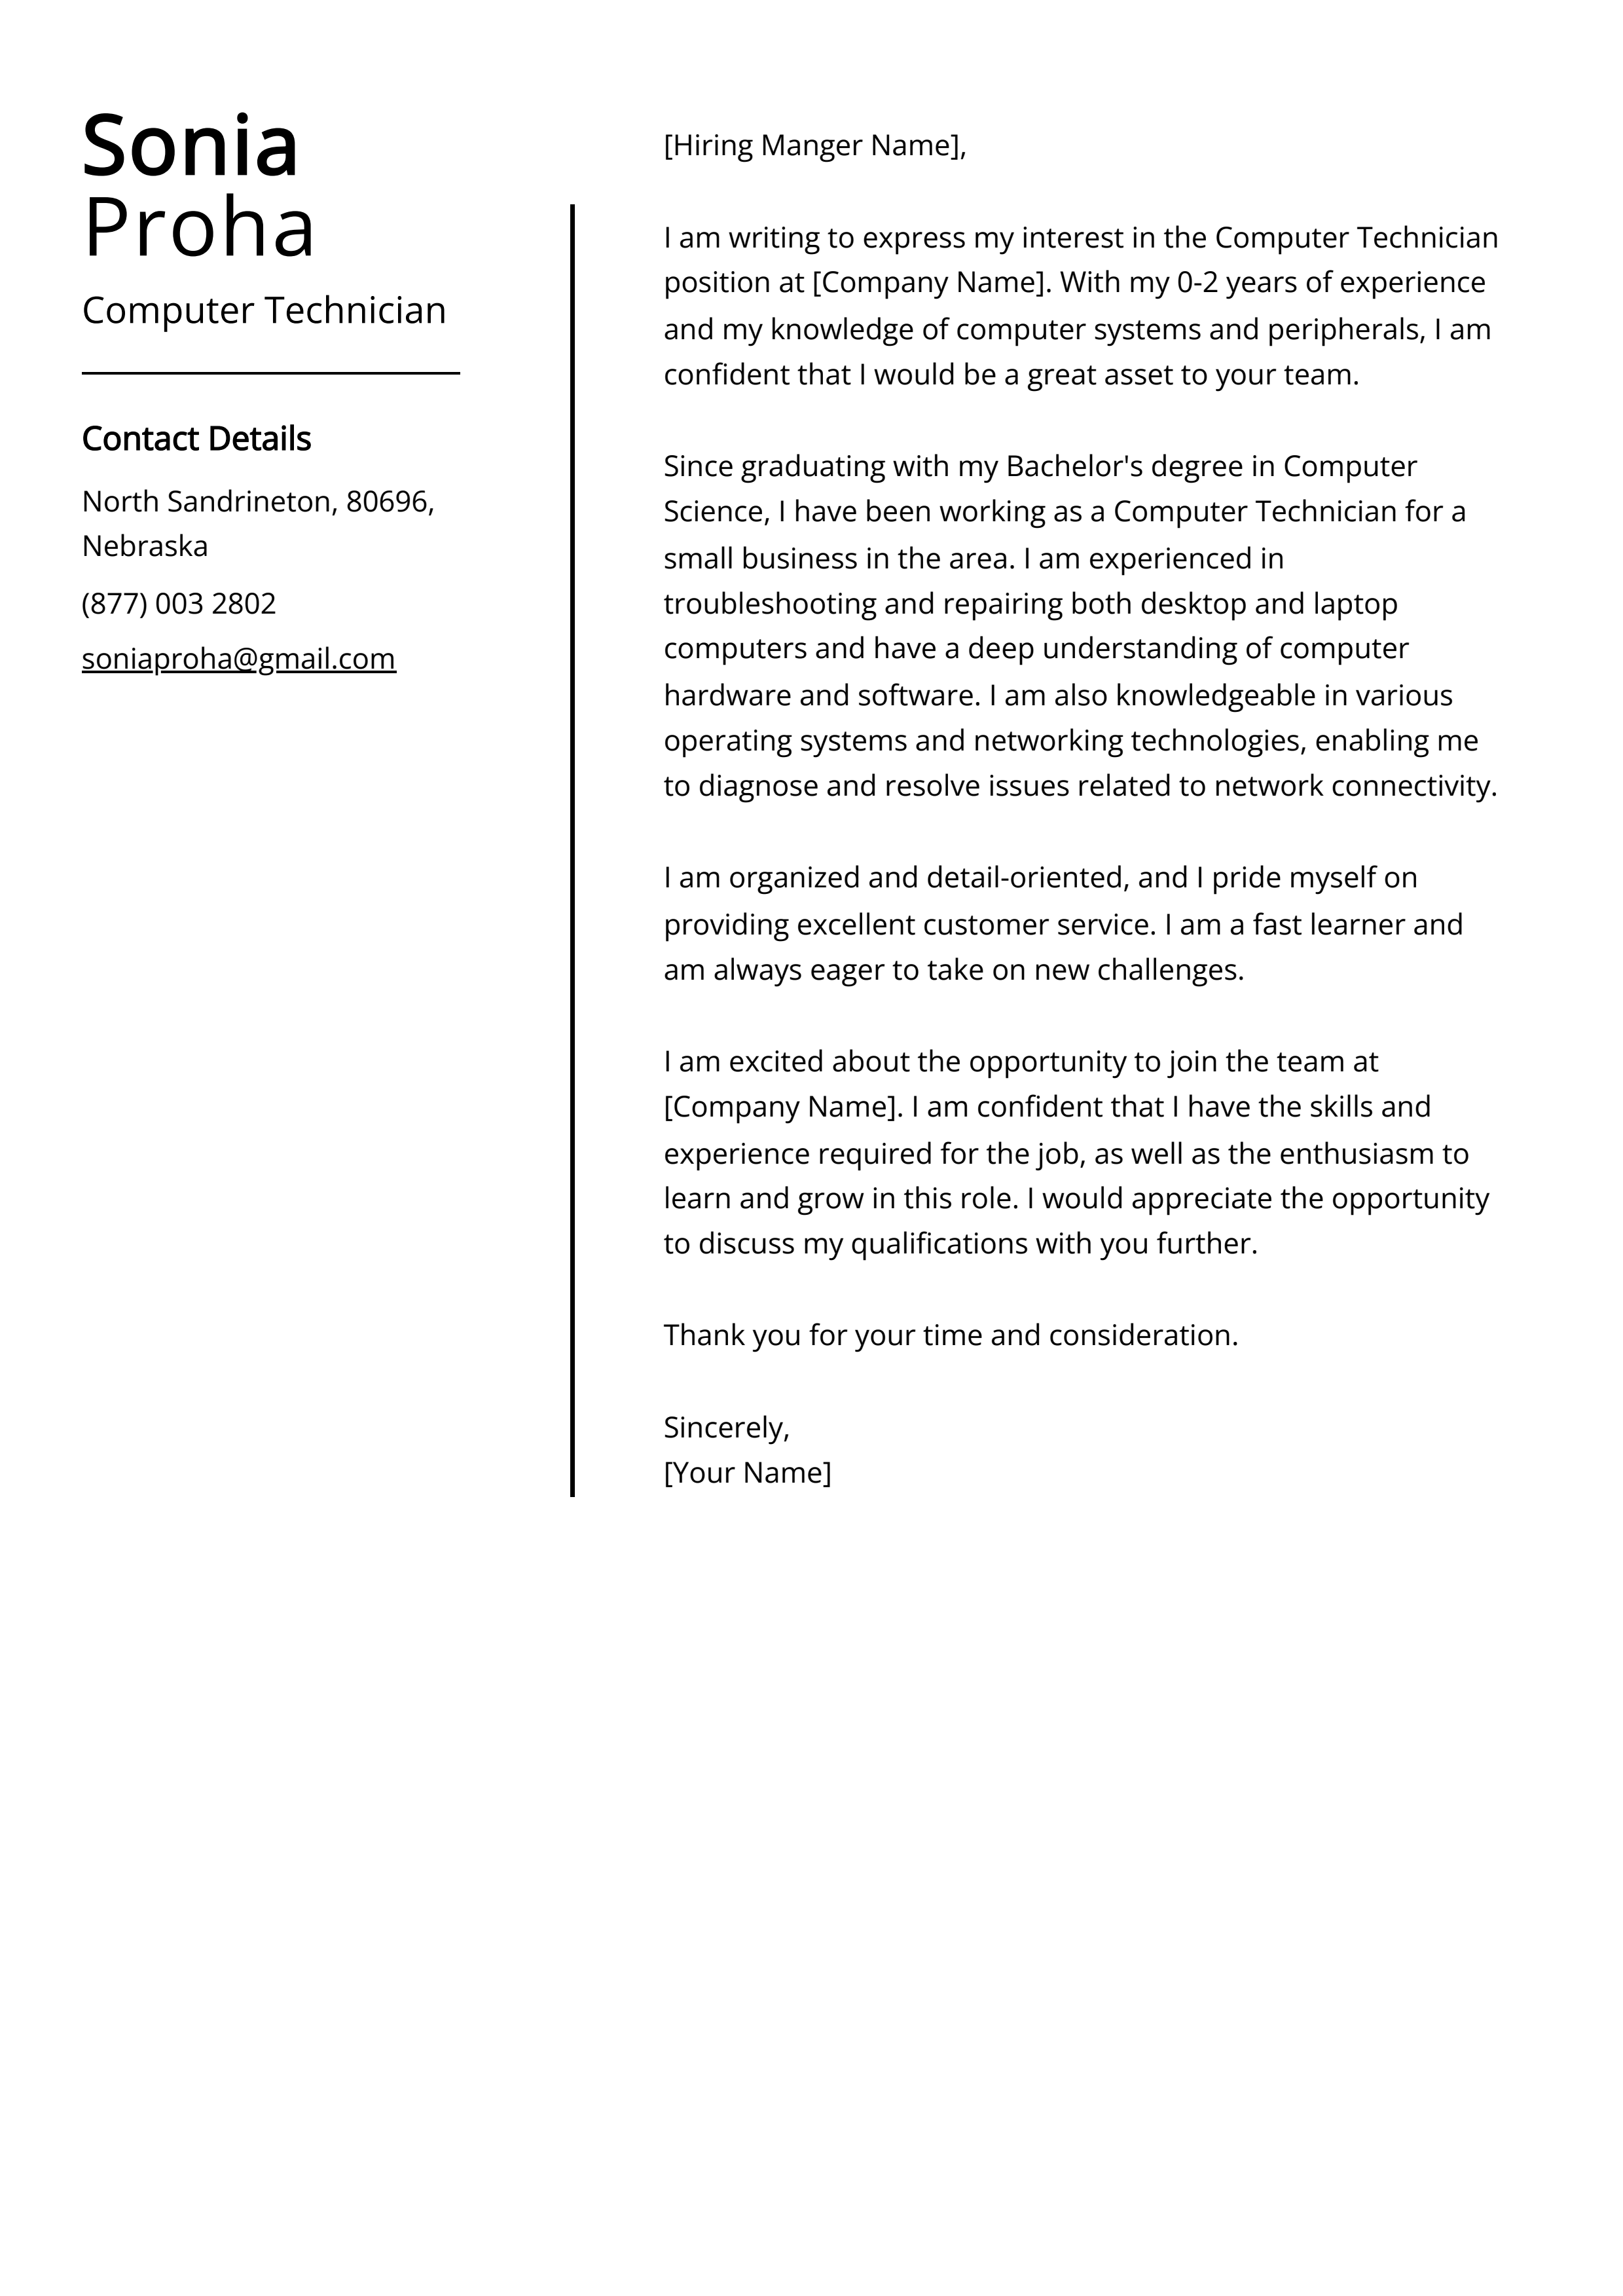 Computer Technician Cover Letter Example